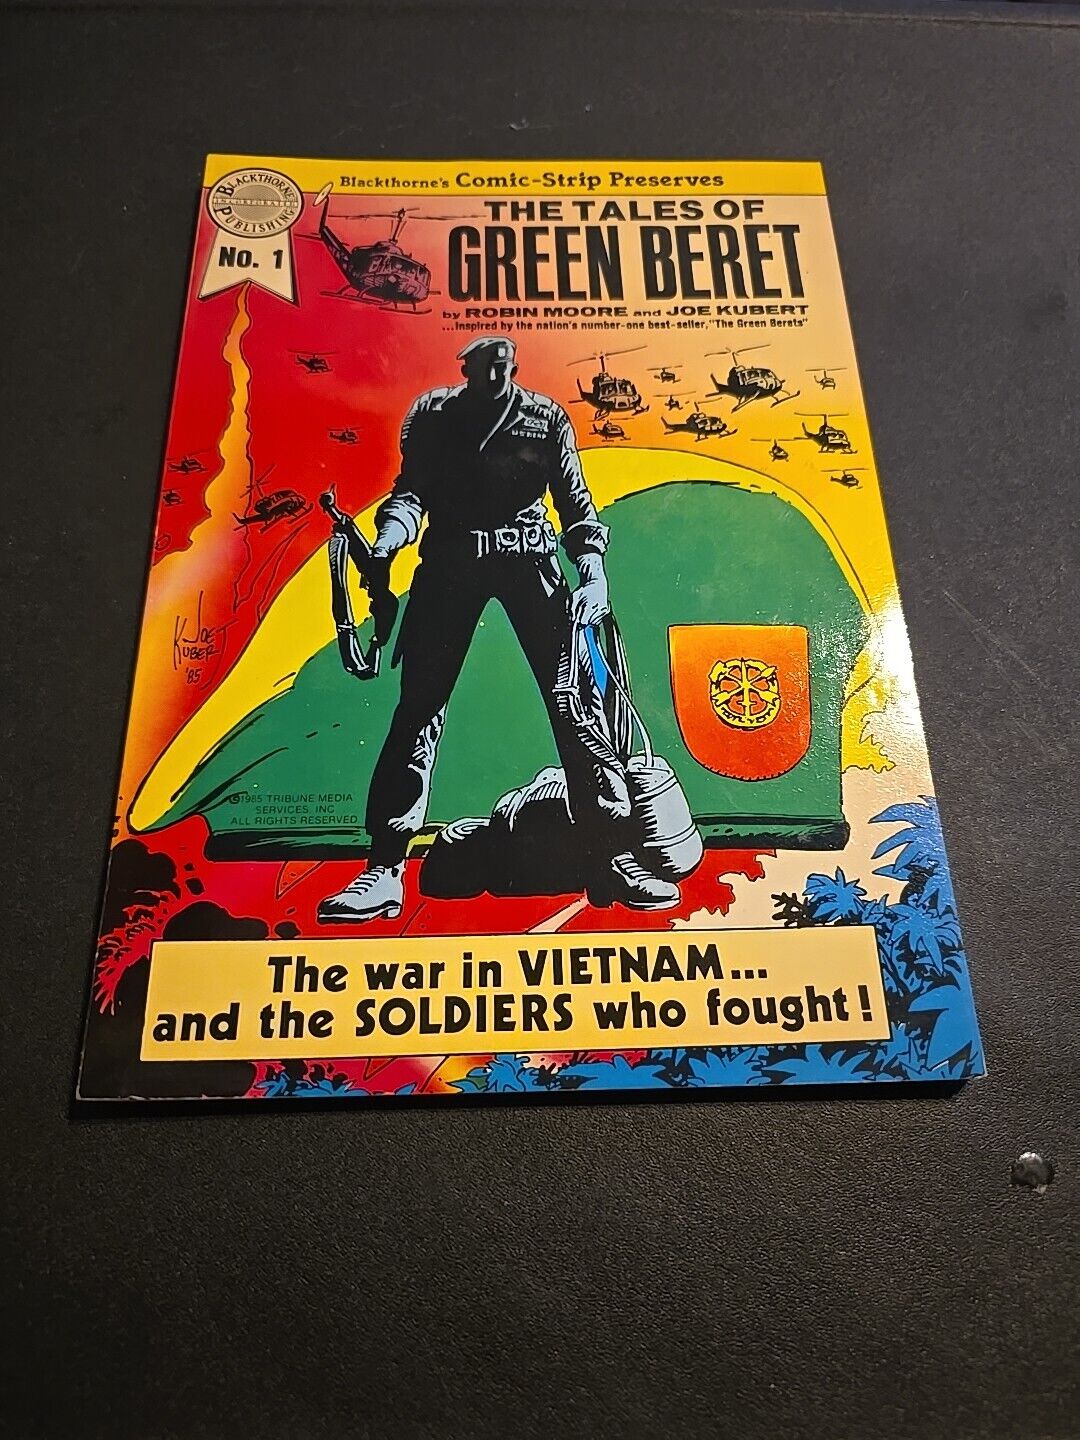 THE TALES OF GREEN BERET #1 BLACKTHORNE'S COMIC-STRIP By Robin Moore